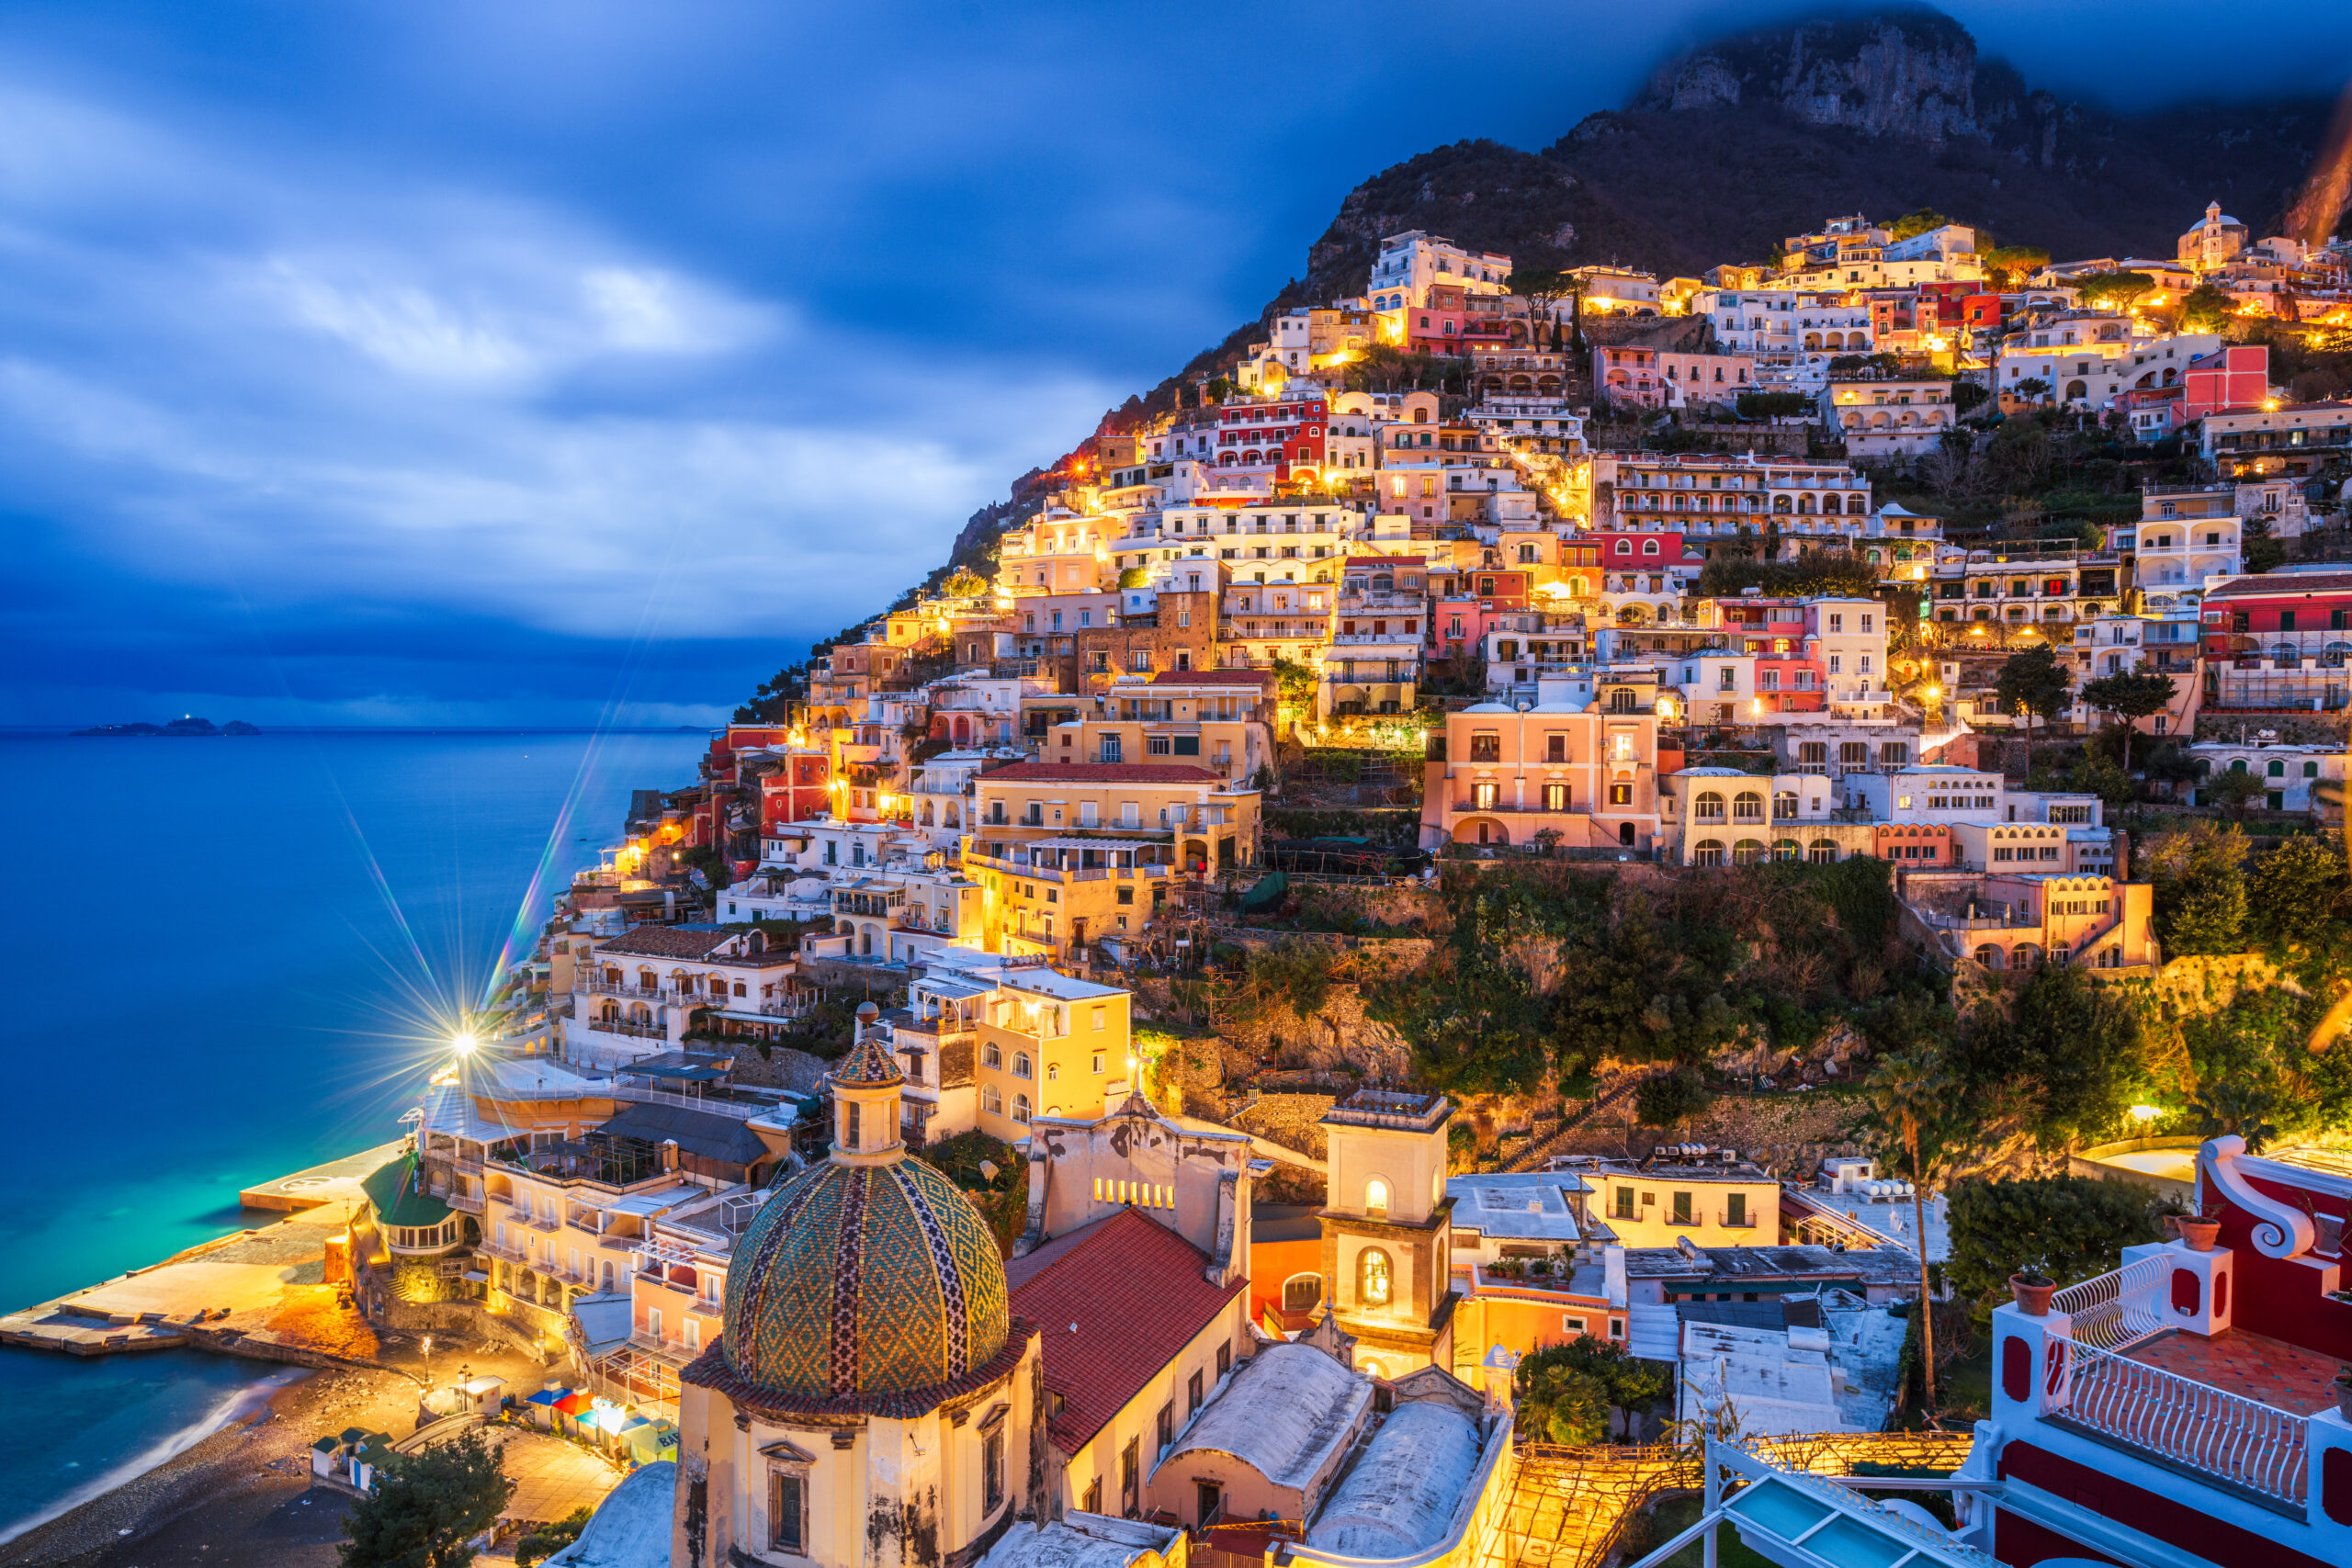 Explore affordable travel options to experience the beauty of the amalfi coast in italy